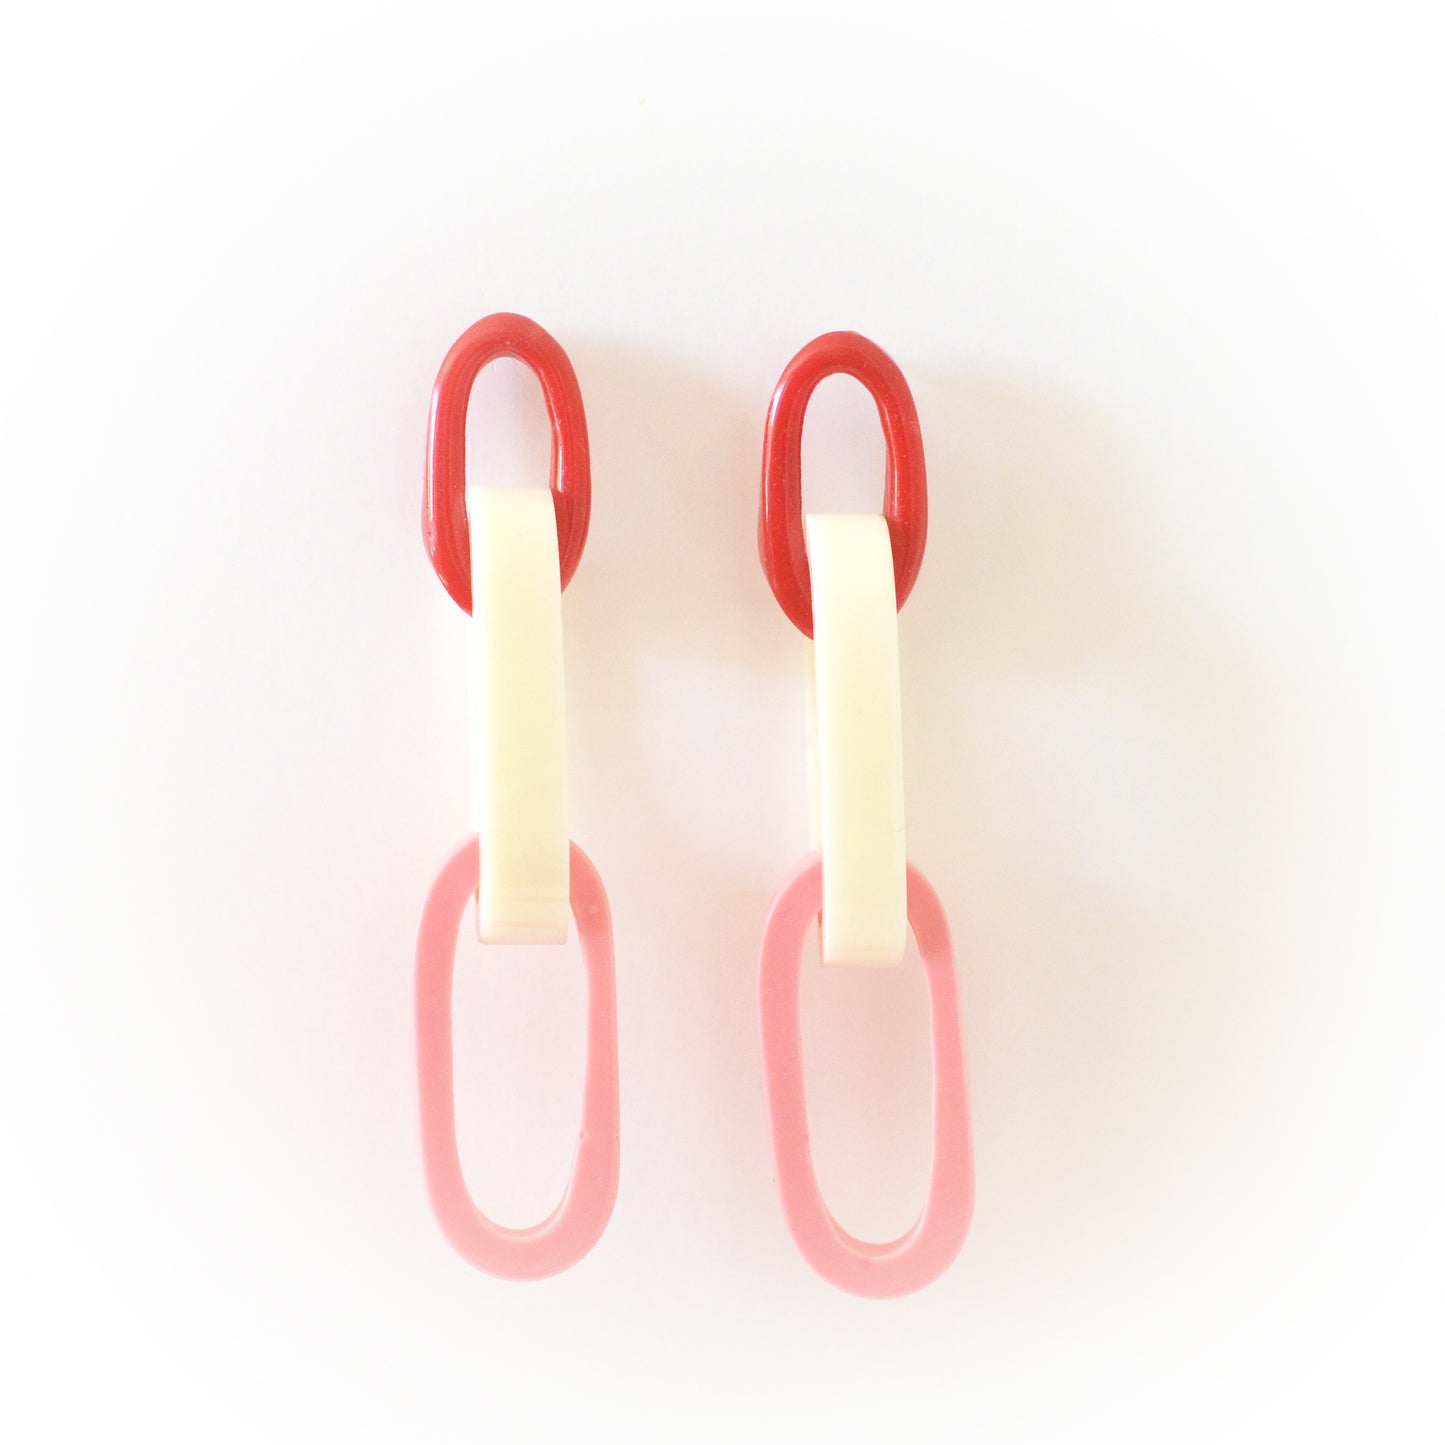 Taffy Long Link DROPS-Red/White/Blush Pink